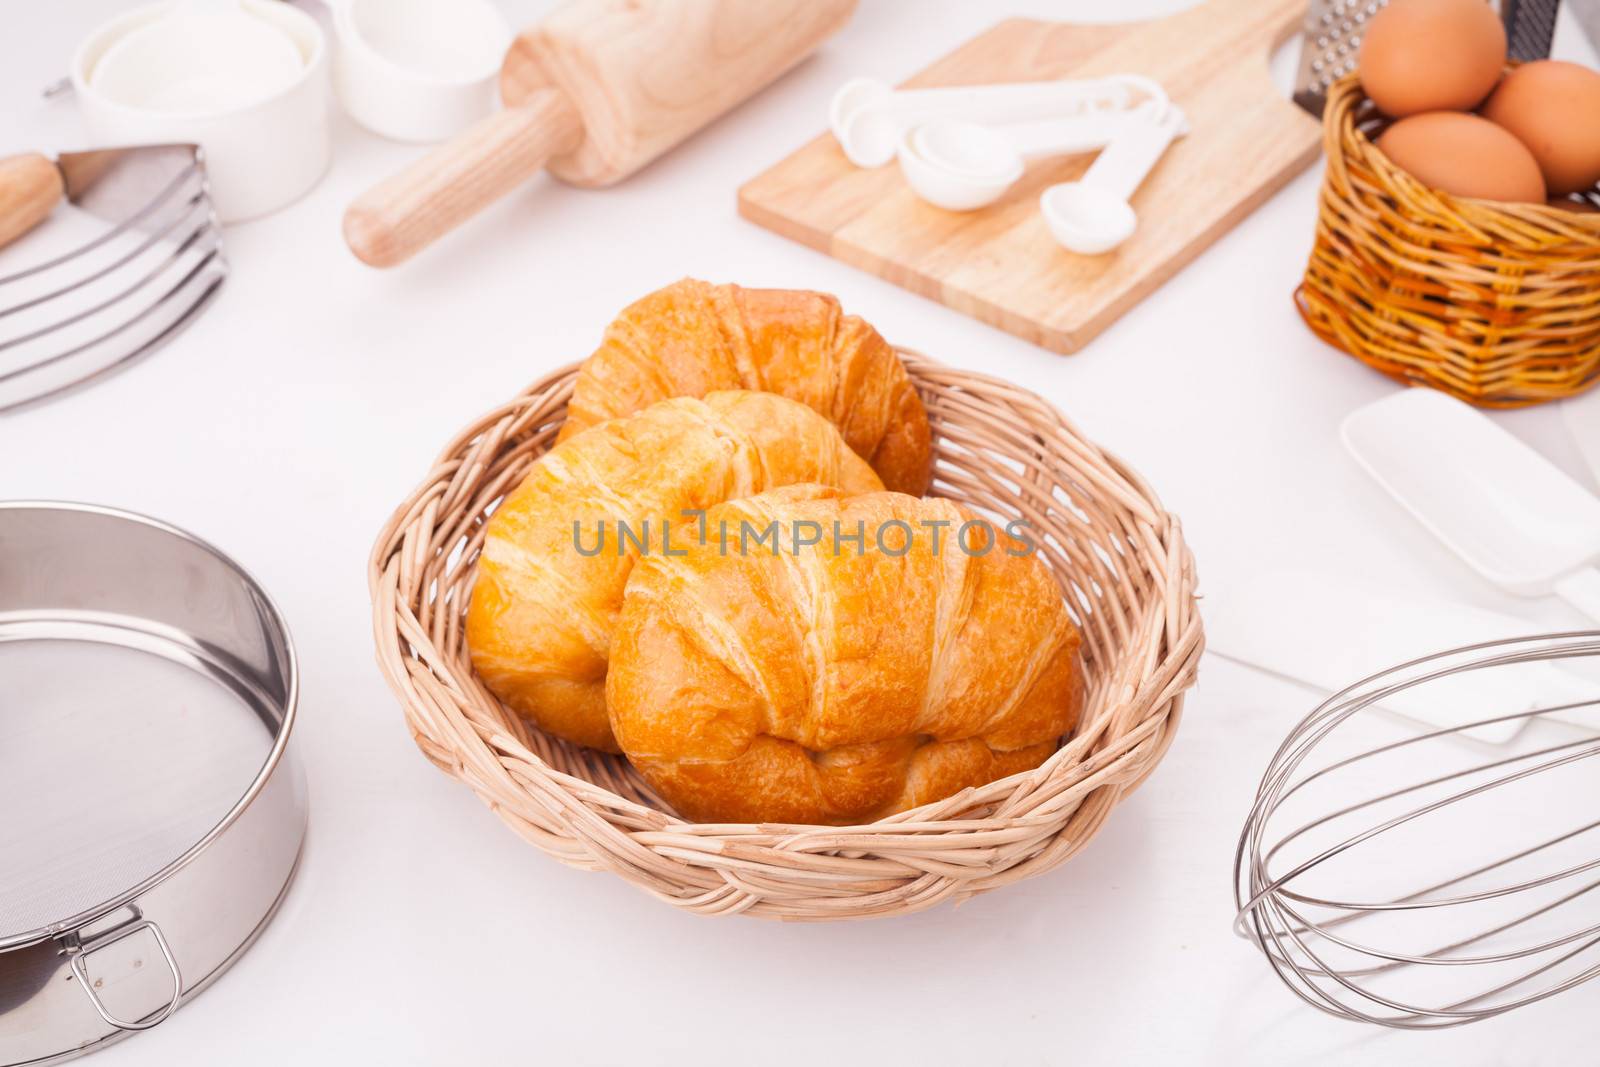 Fresh croissant Placed on the table along with equipment for the bakery.